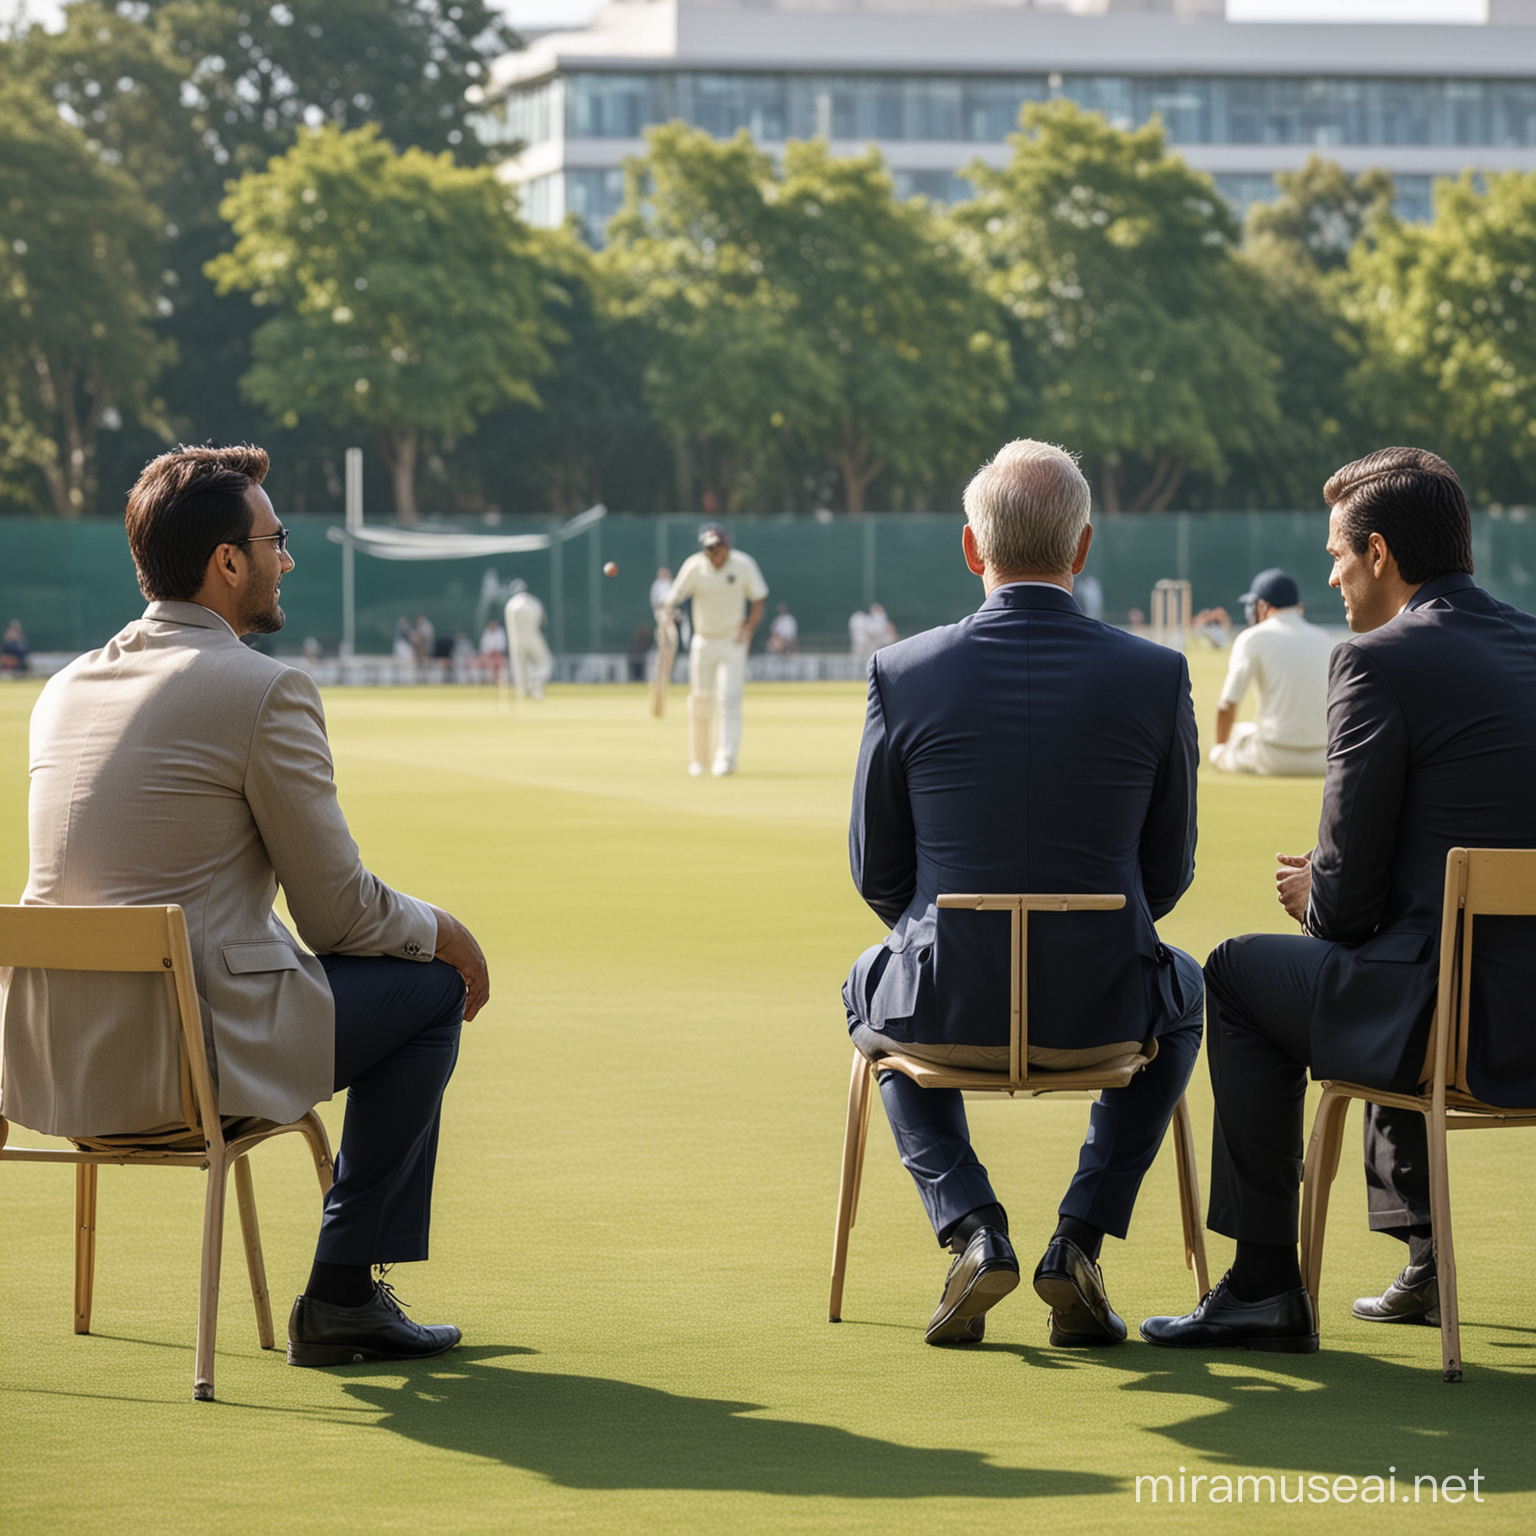 Rear view image of business leaders sitting and chatting with each other talking Cricket